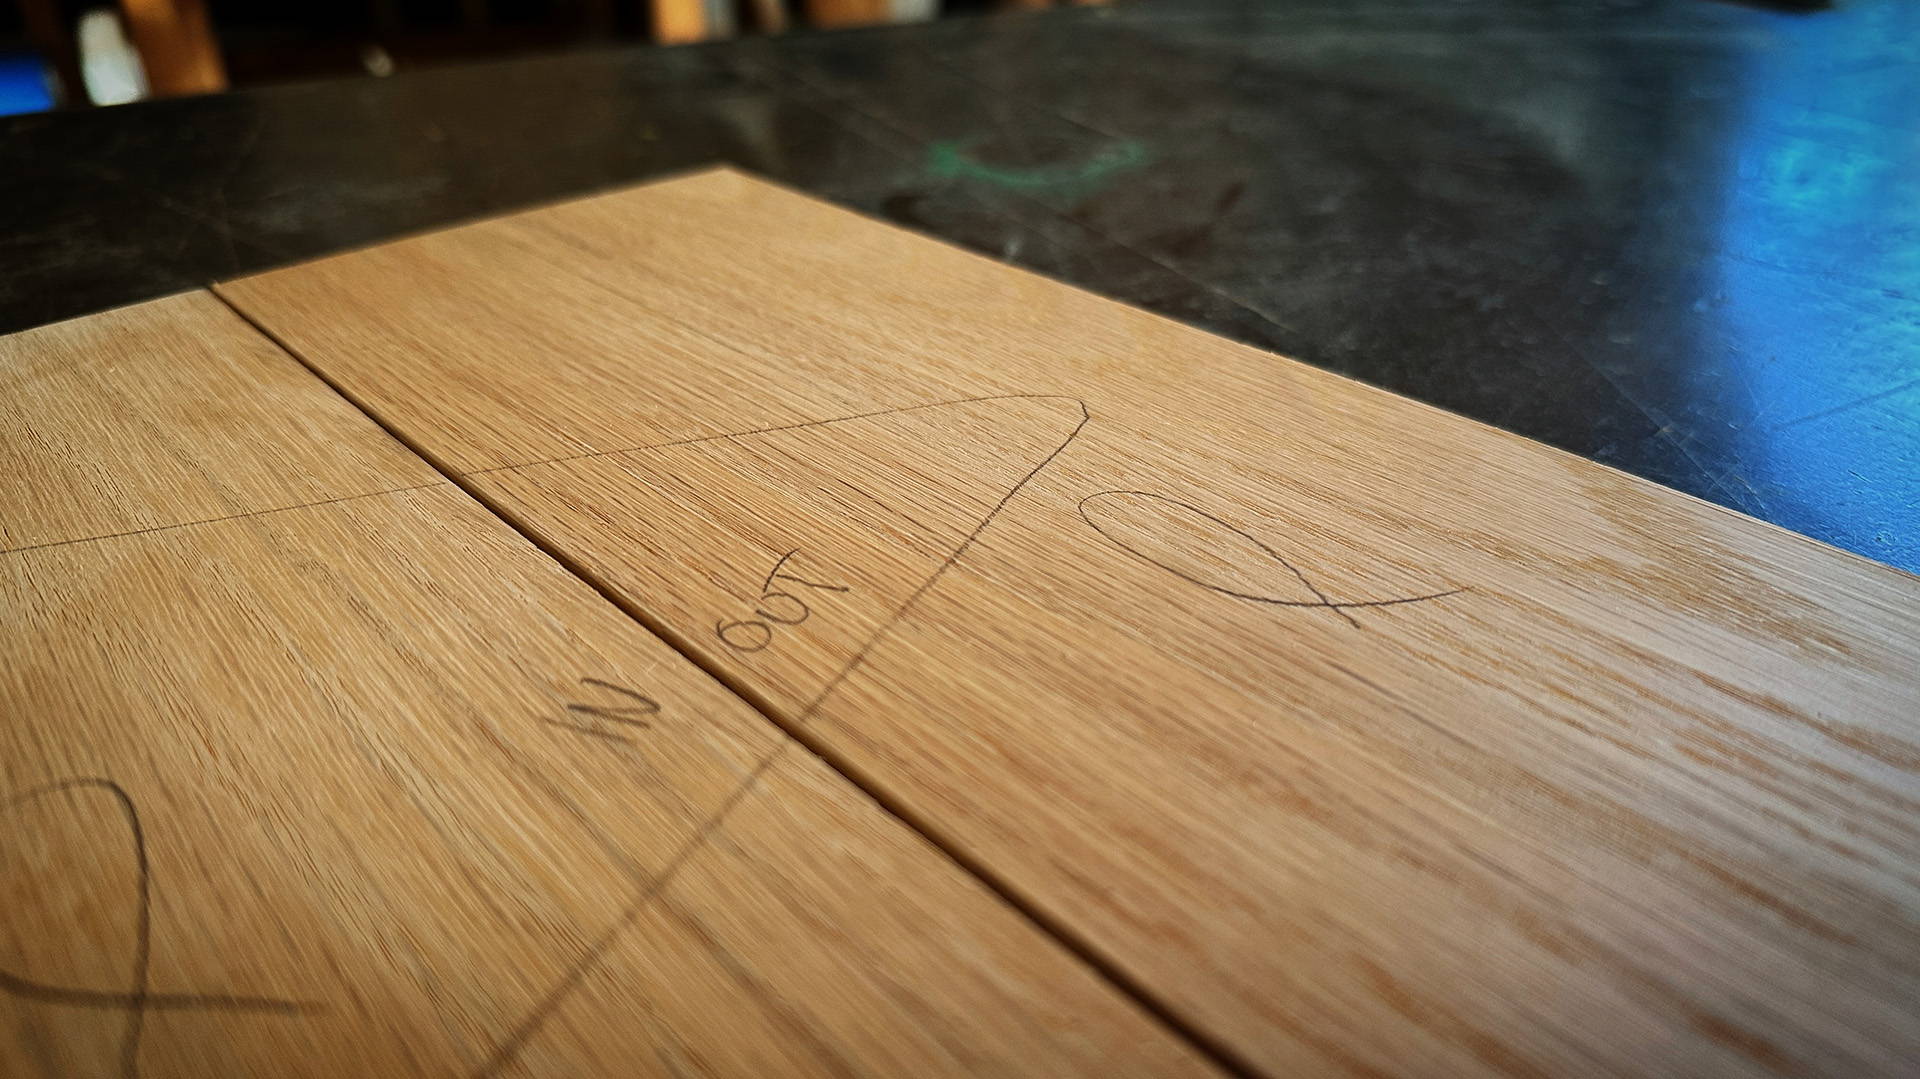 Genius Woodworking Trick for Seamless Edge Joints (Quick Tip)